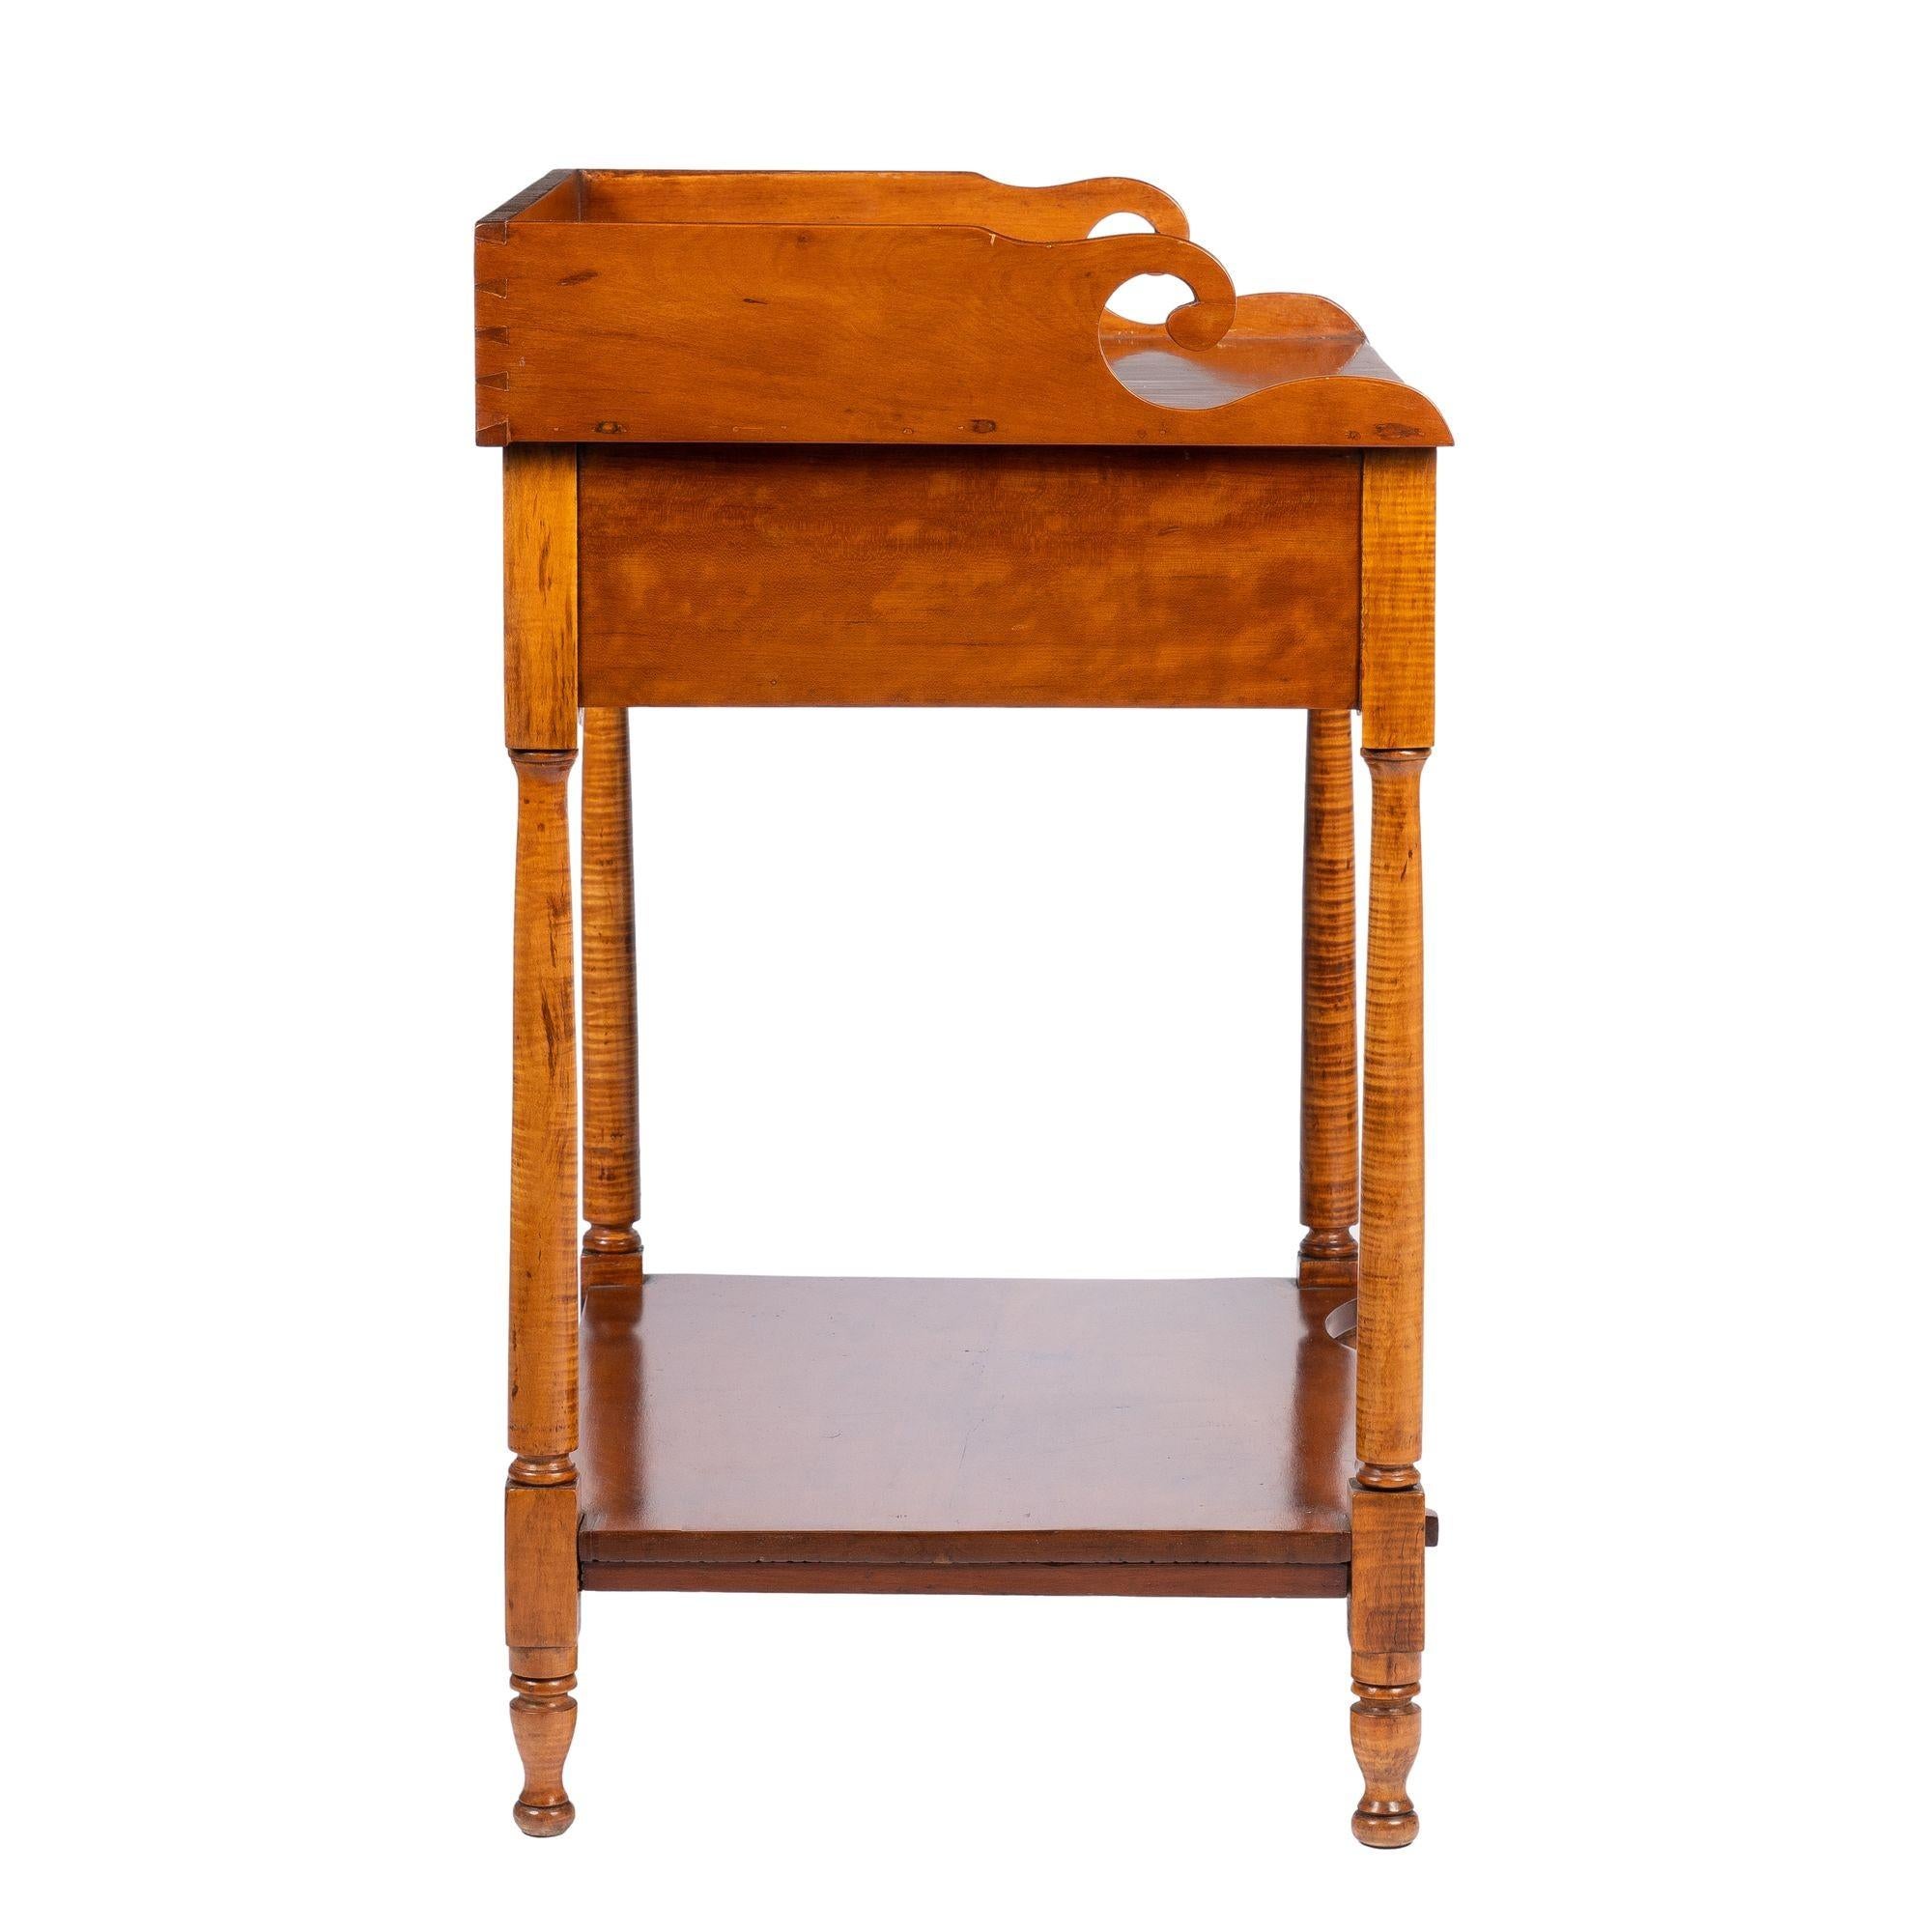 Philadelphia Cherry Wood Stand with Splash on a Conforming Apron, 1820 For Sale 1